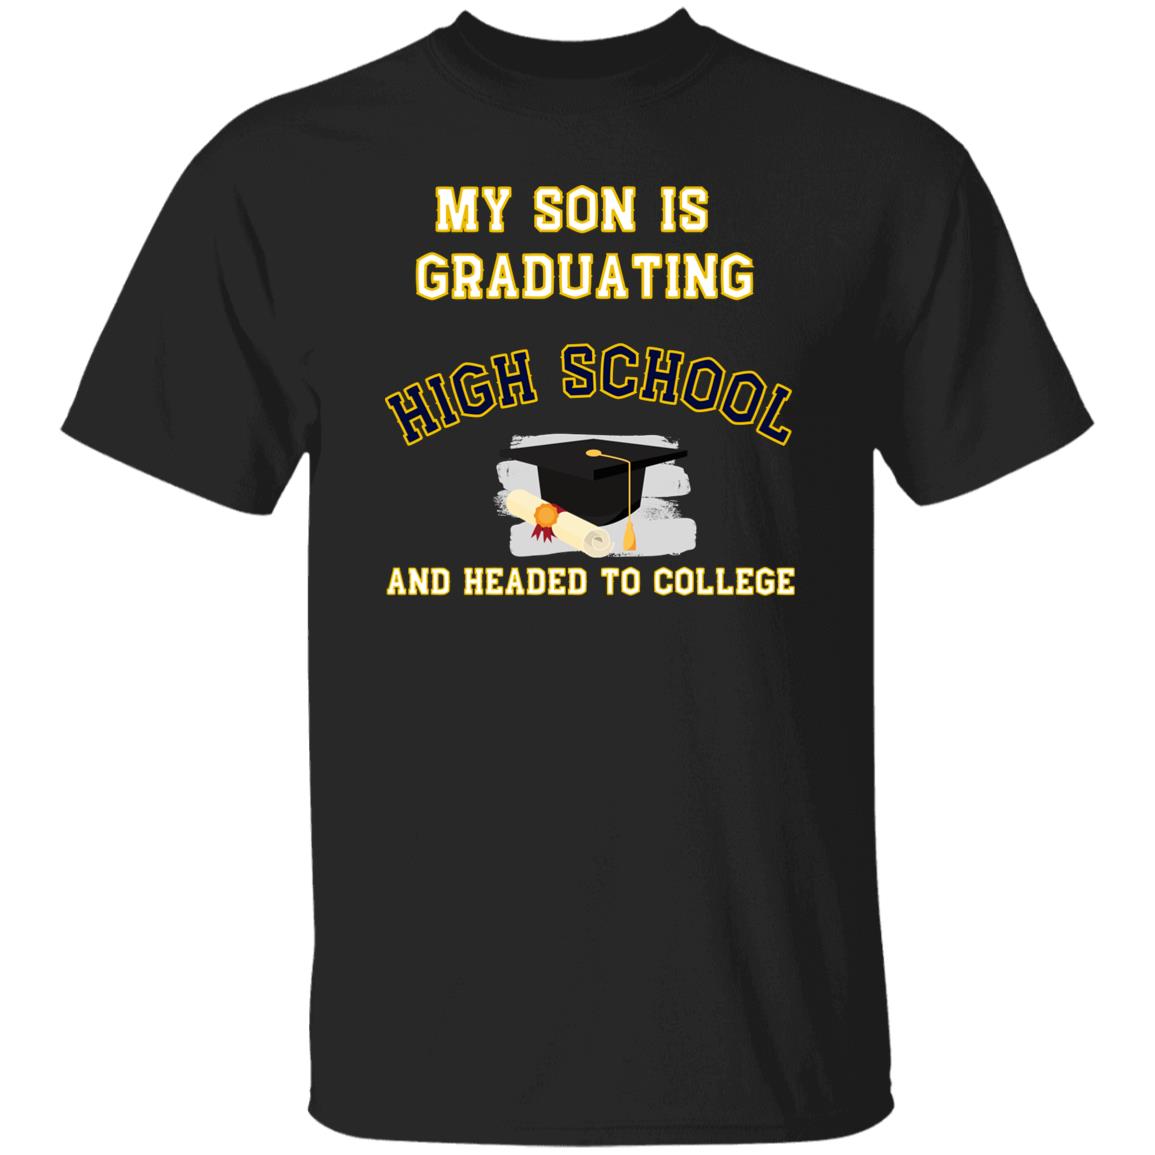 My son is graduating high school and headed to college Tshirt